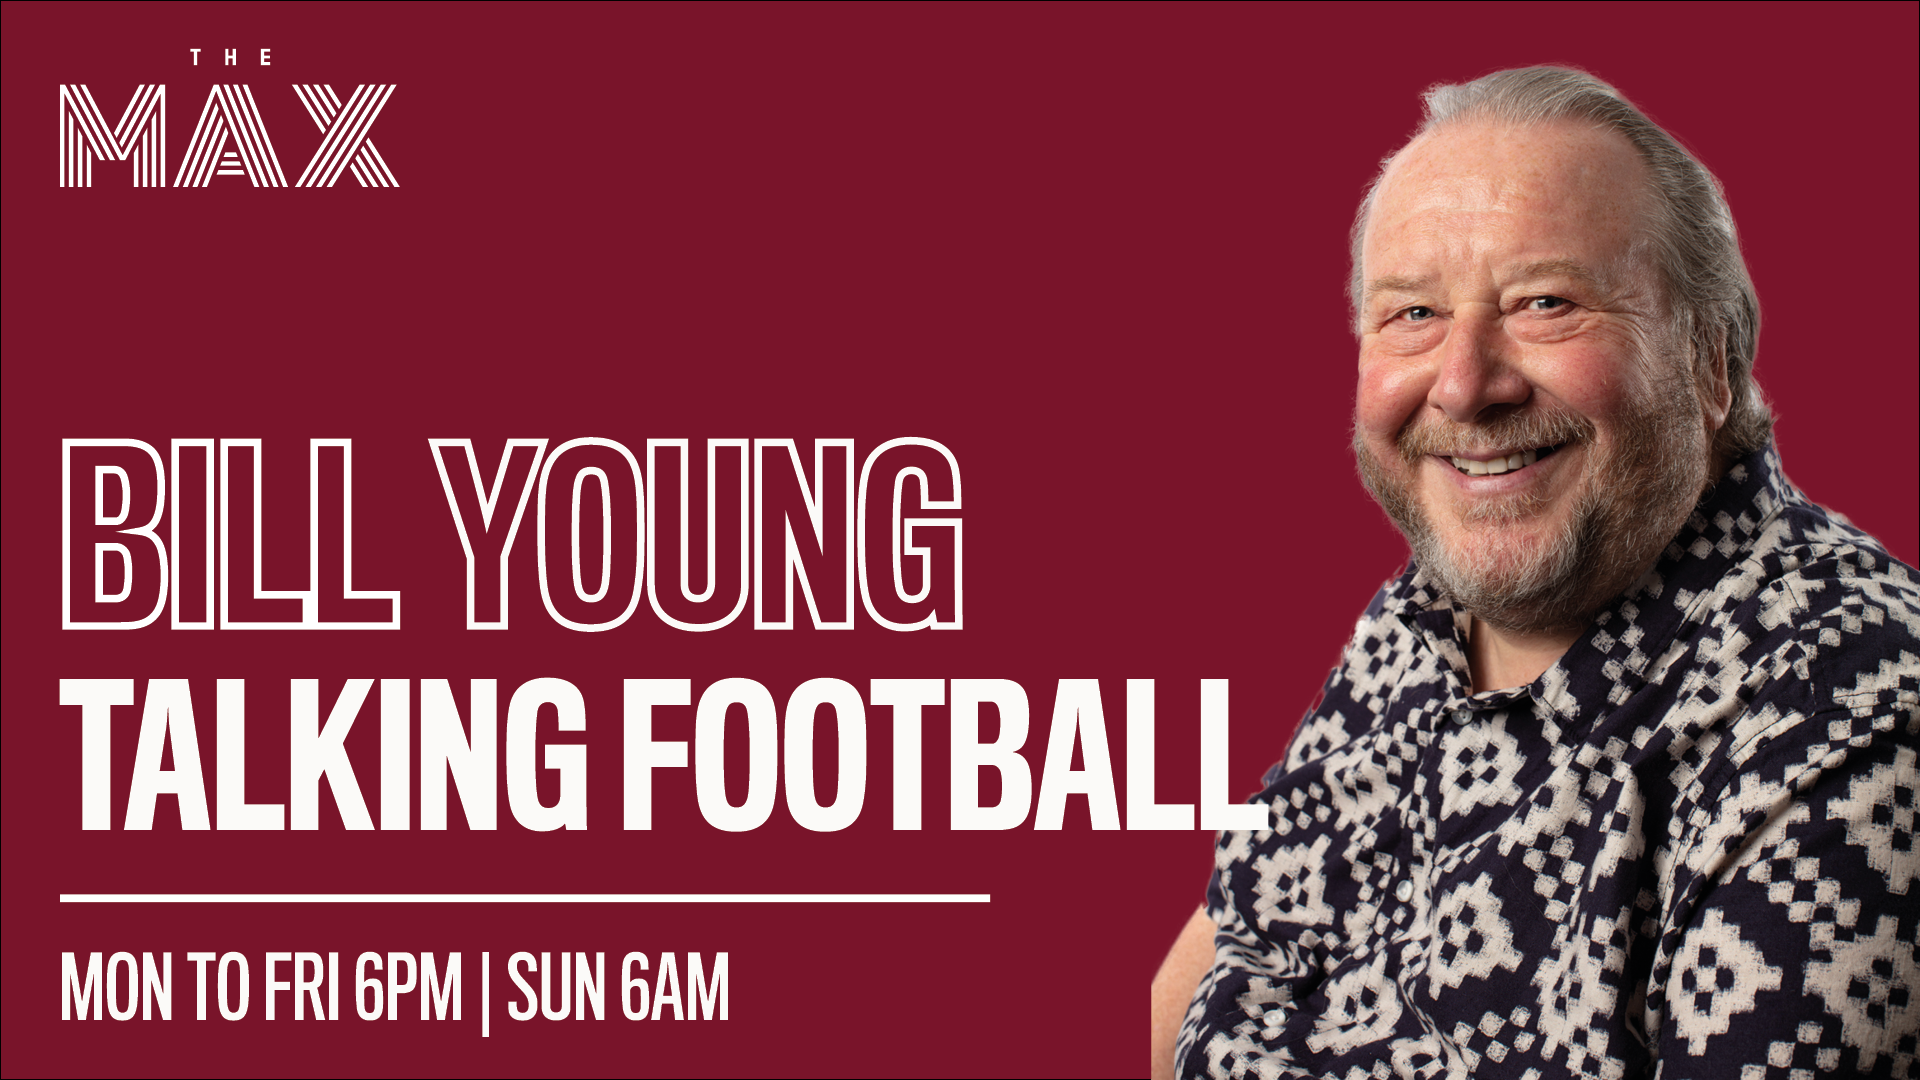 Talking Football with Bill Young - Monday 8th March